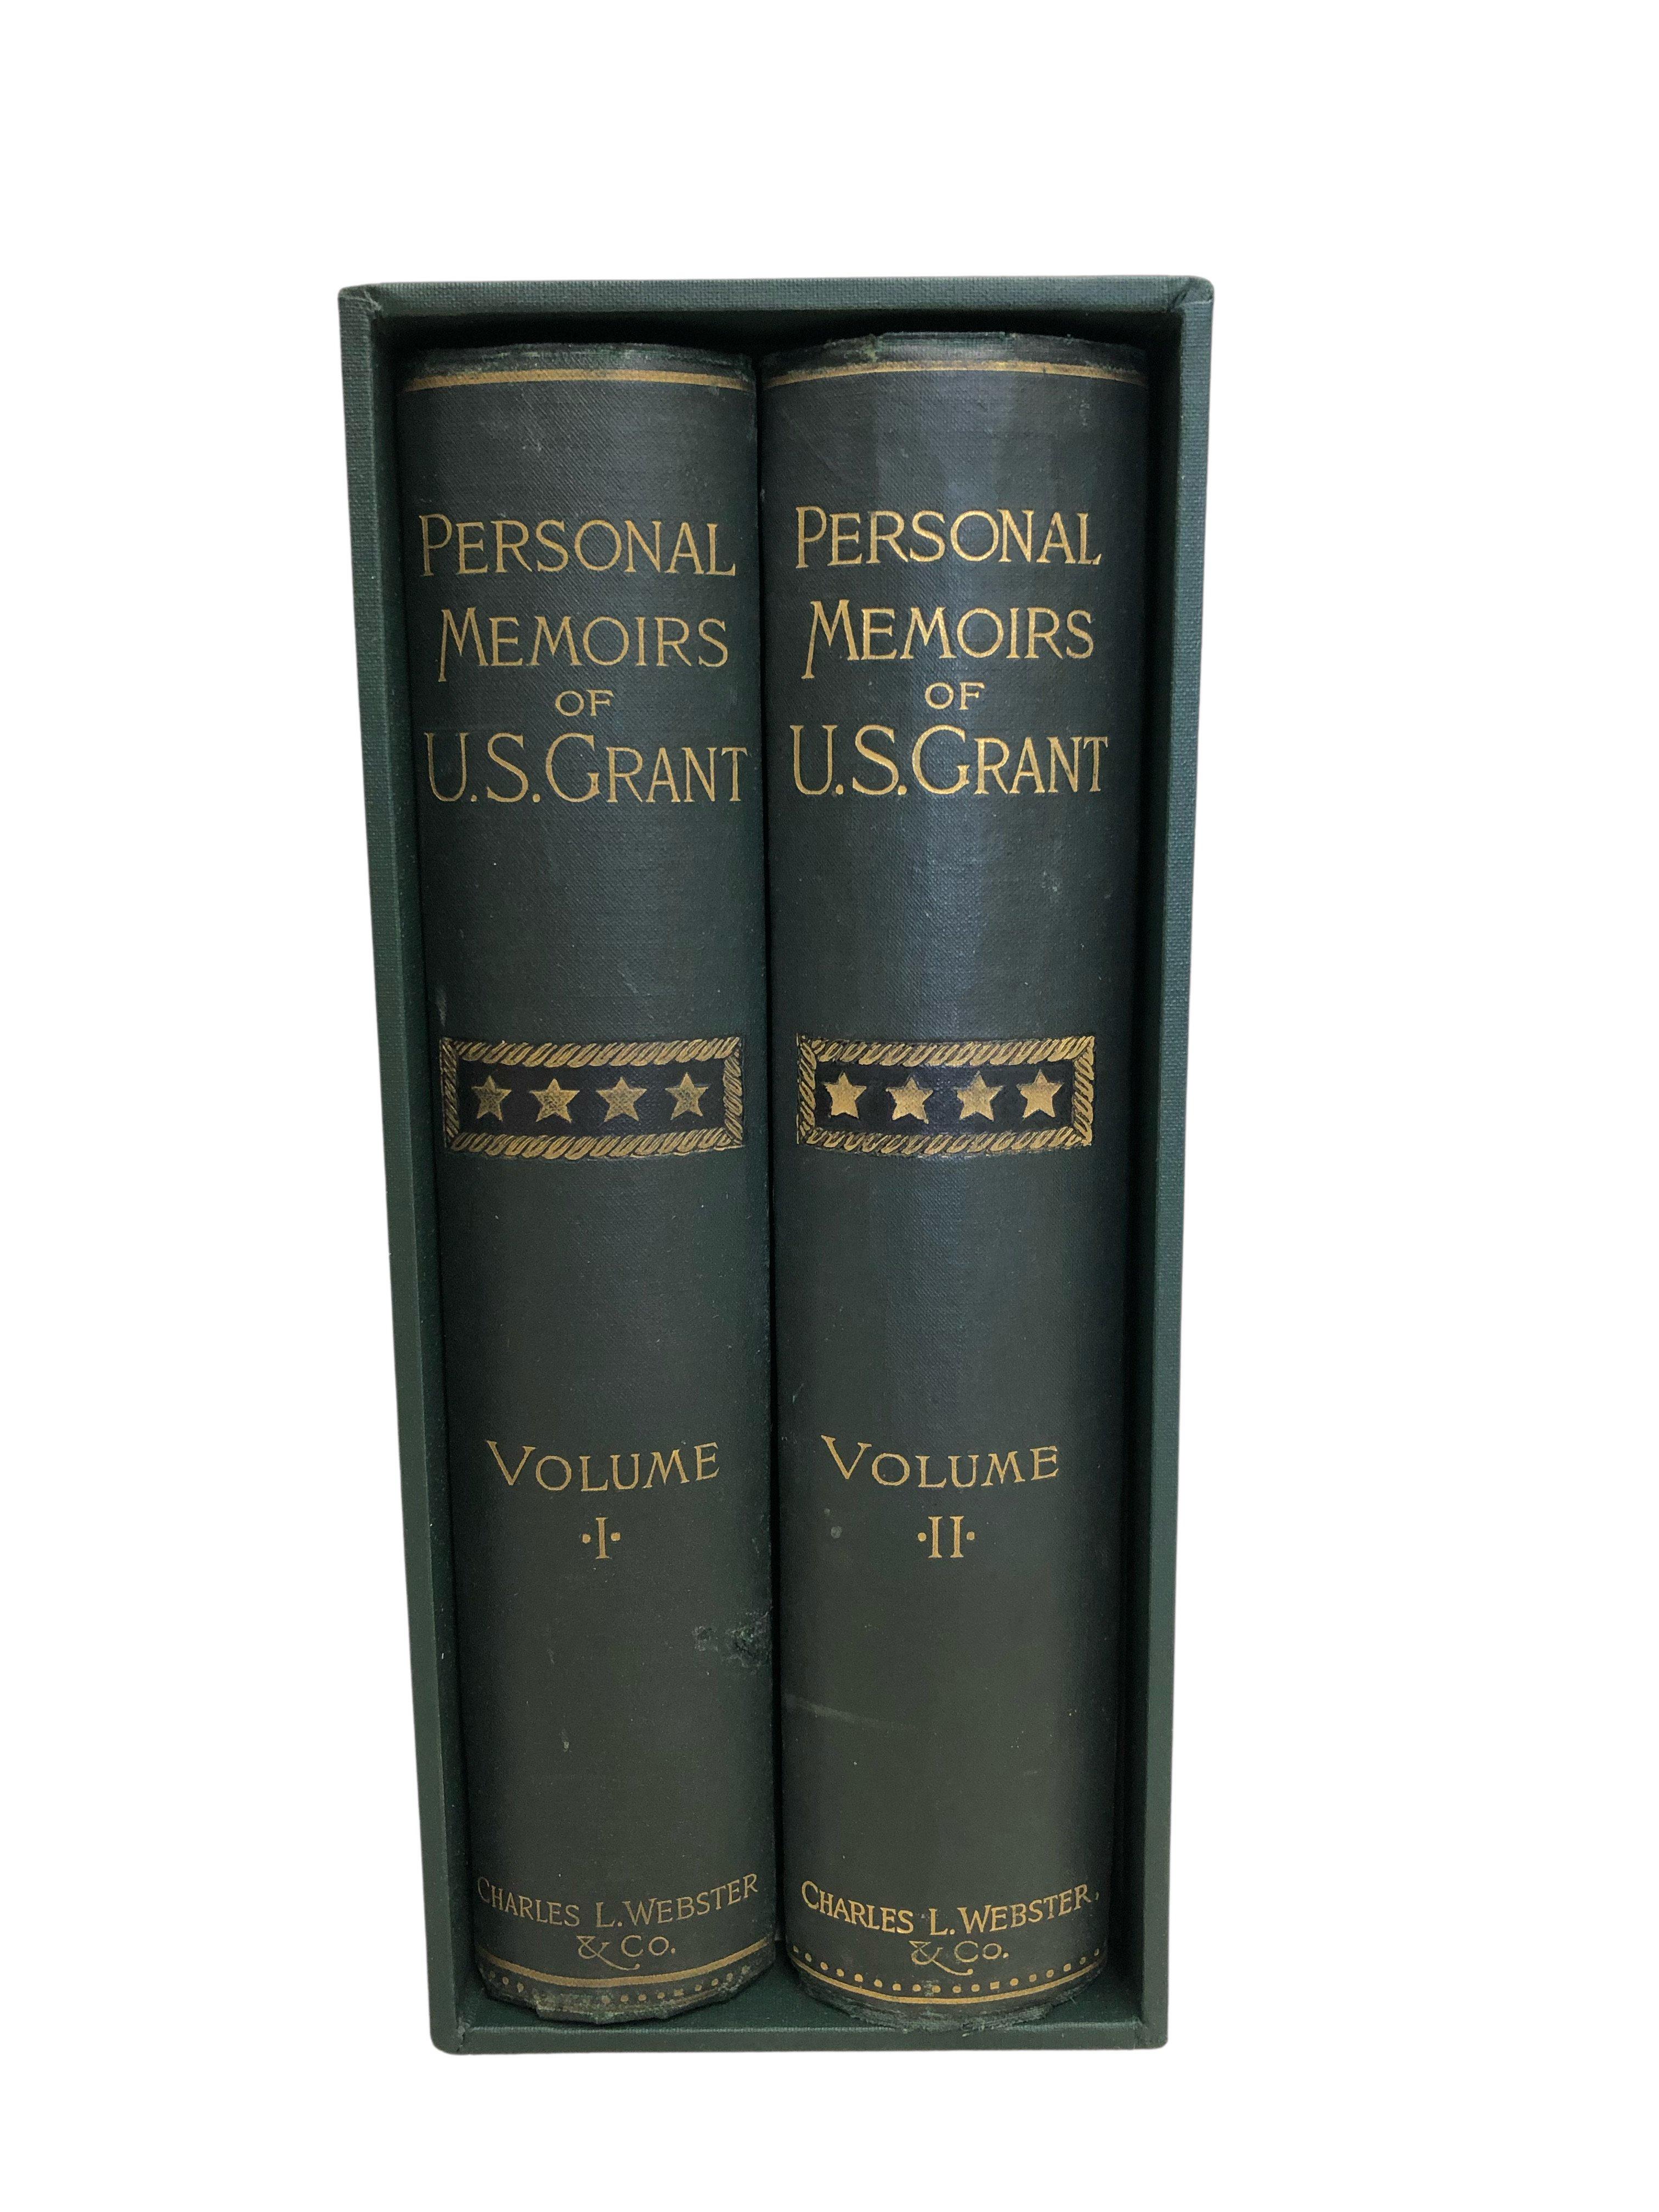 grant's memoirs first edition